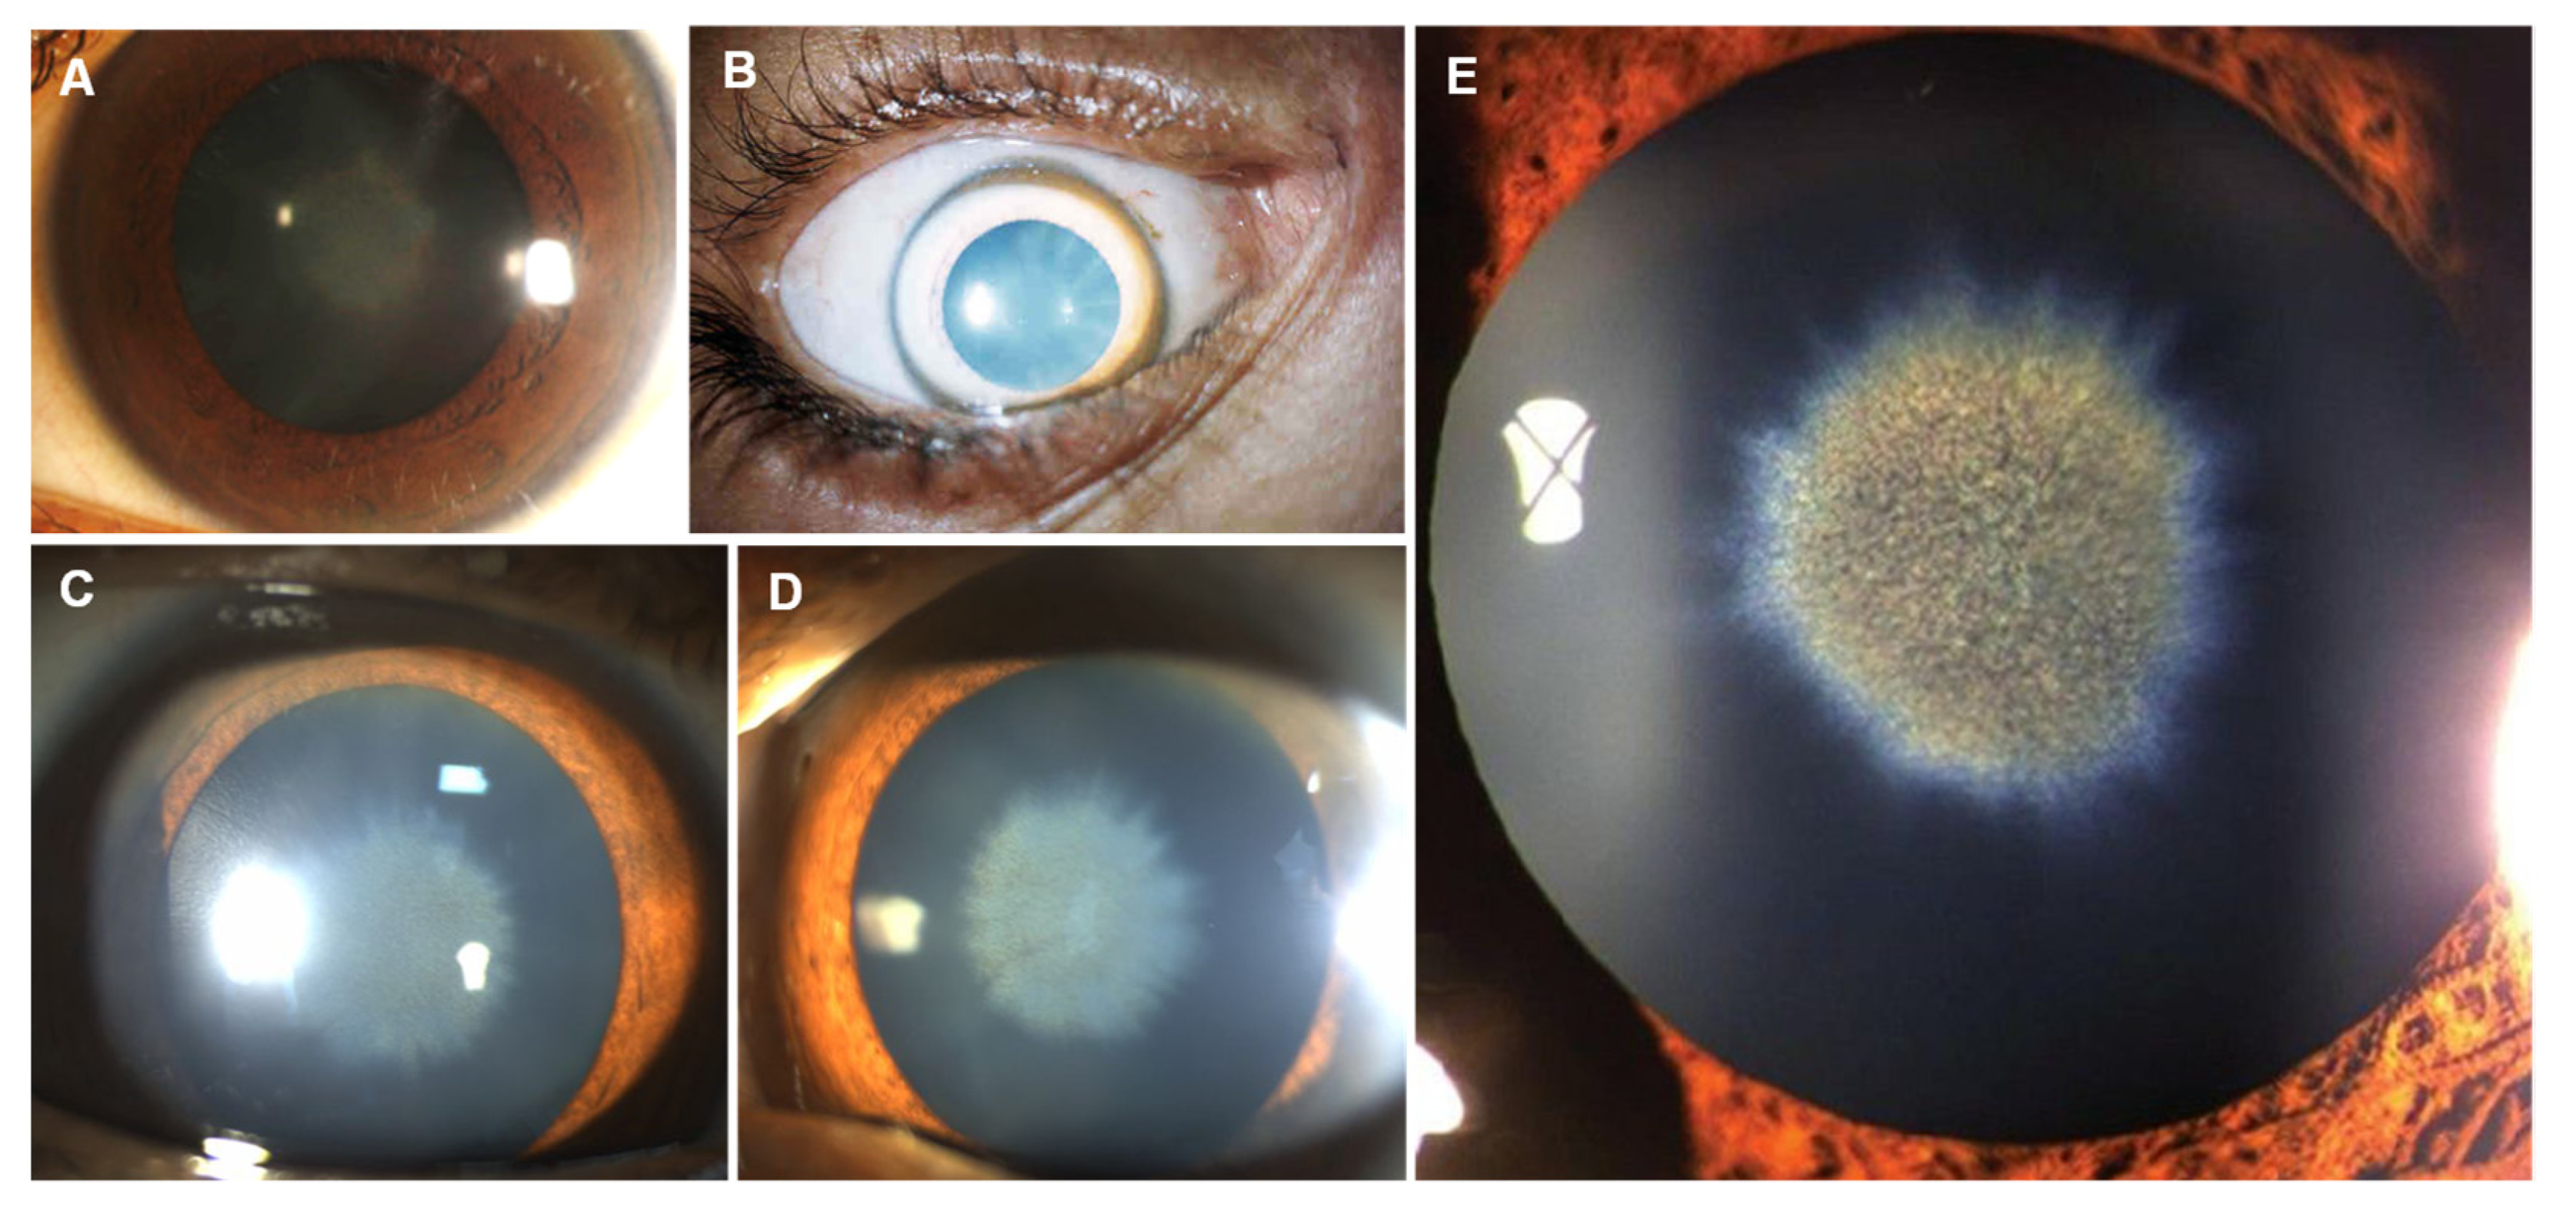 Ocular manifestations of liver disease in children: Clinical aspects and  implications